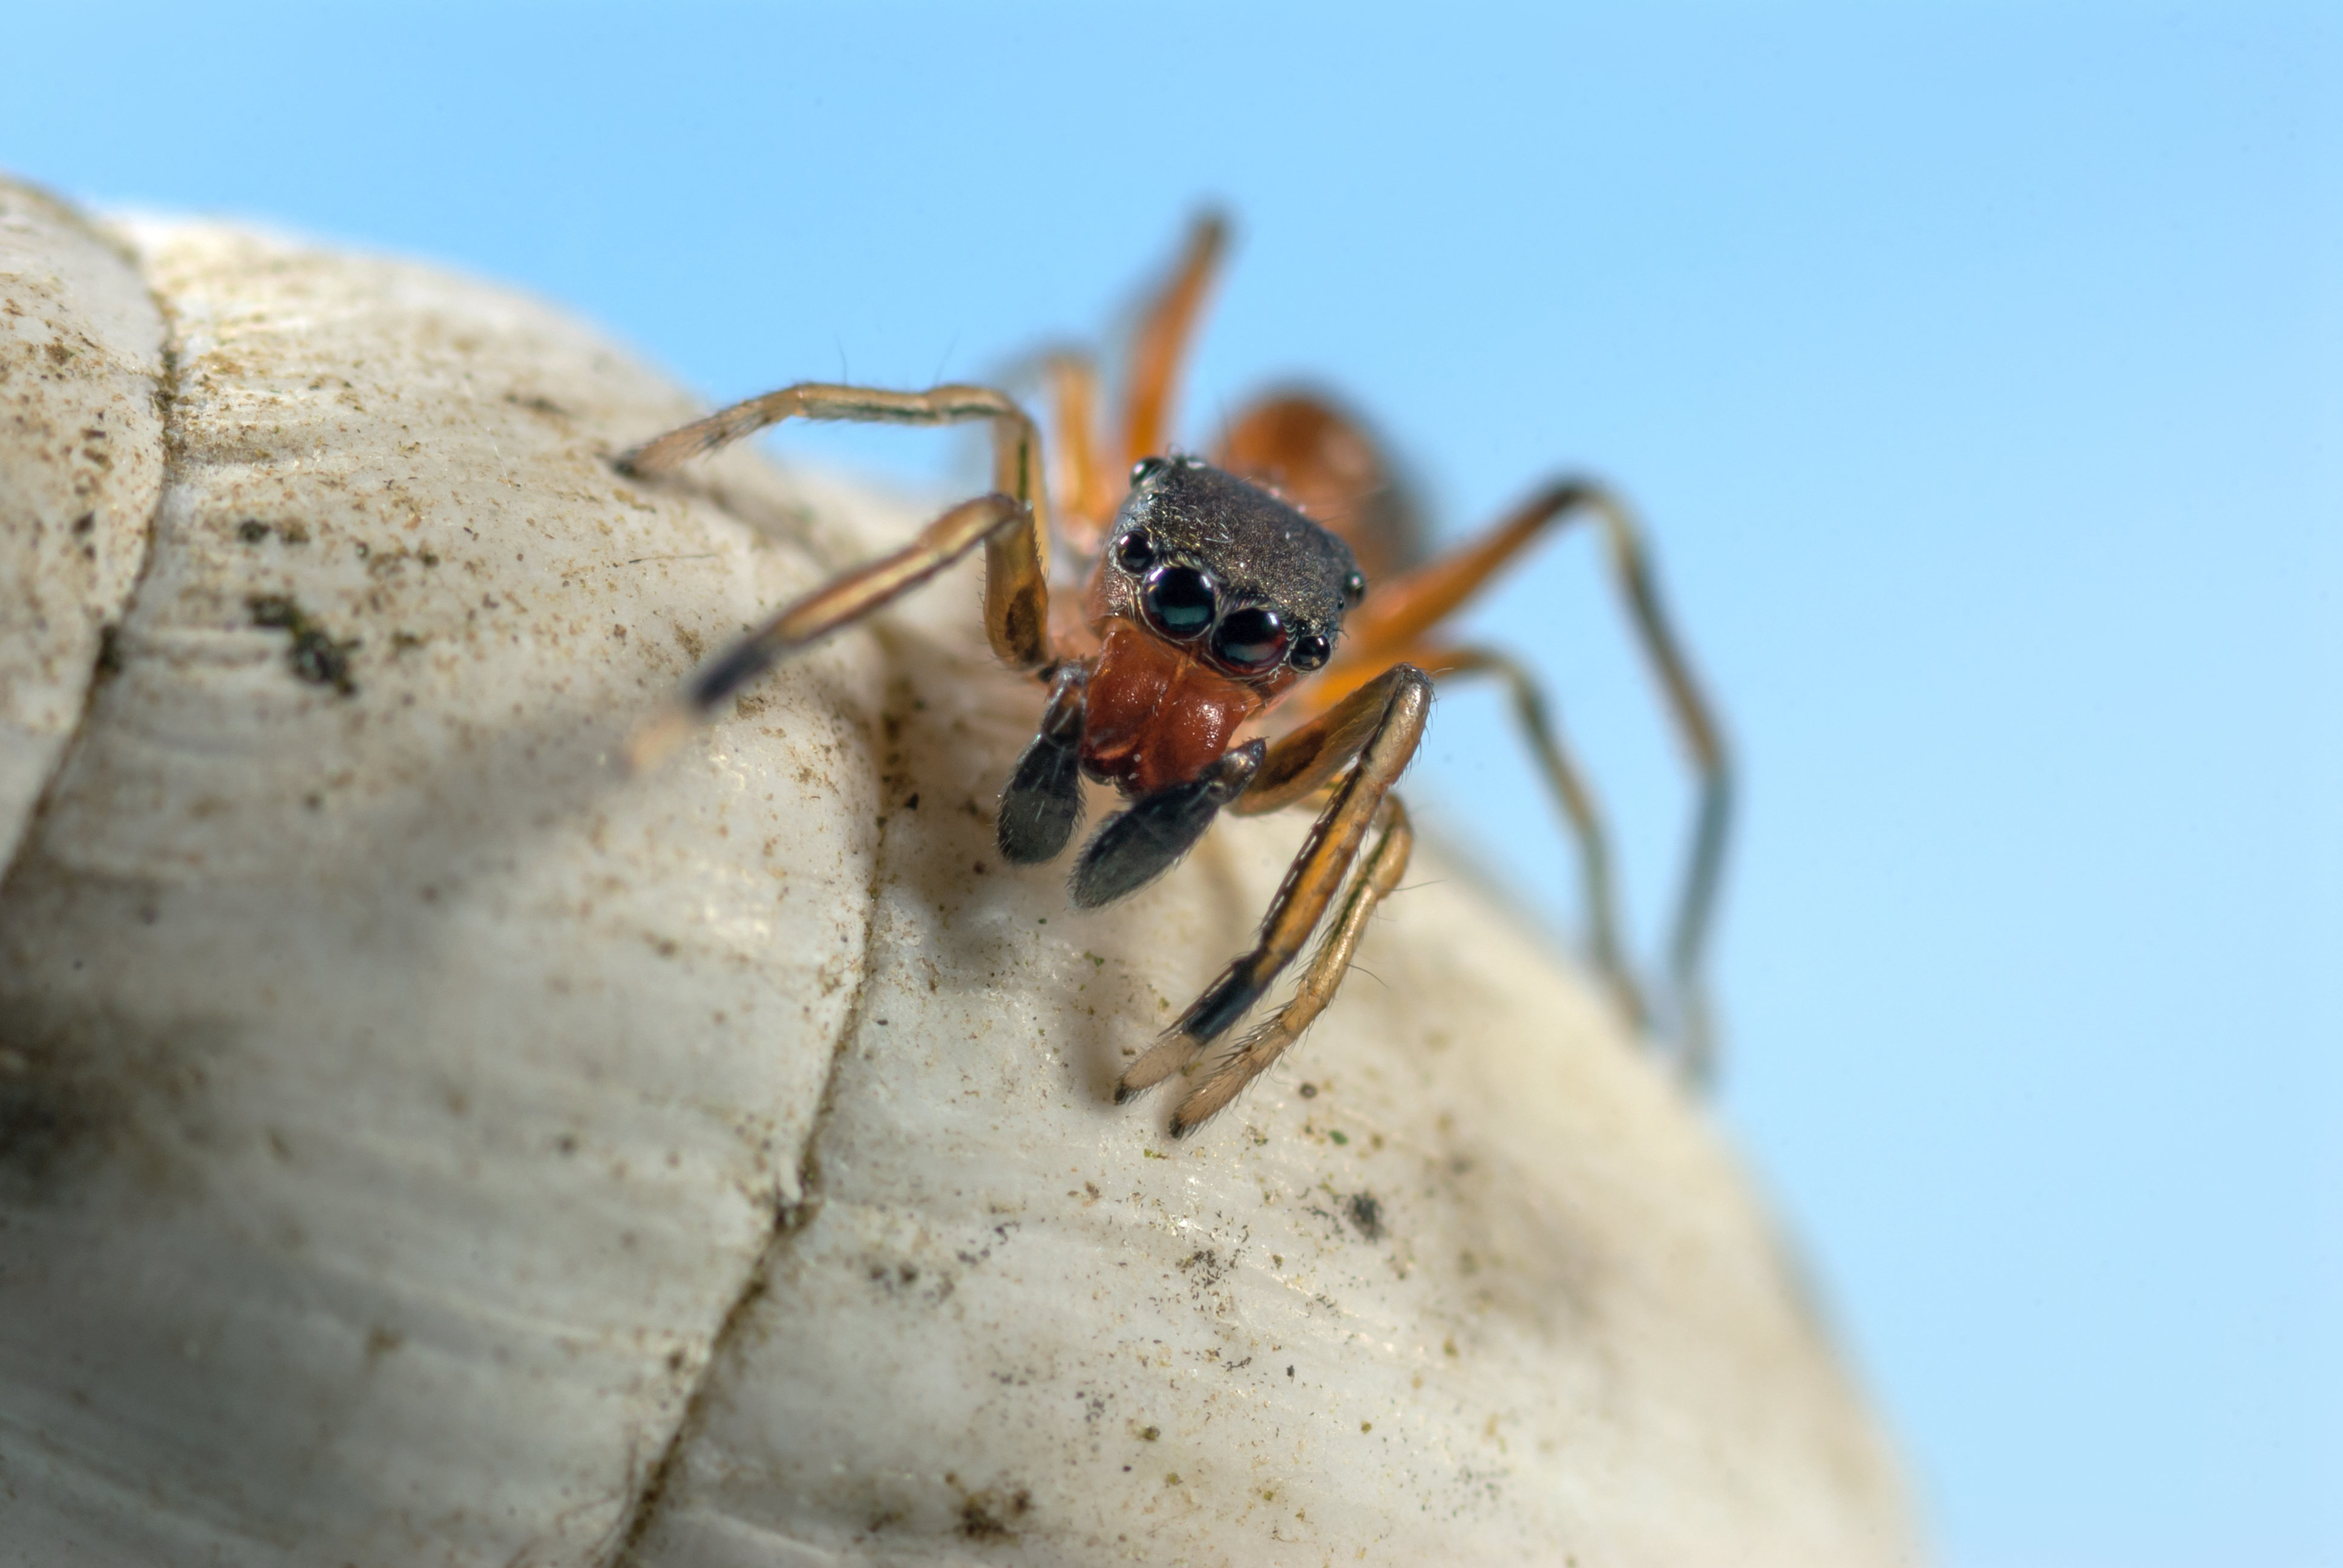 Female ant mimic jumping spider